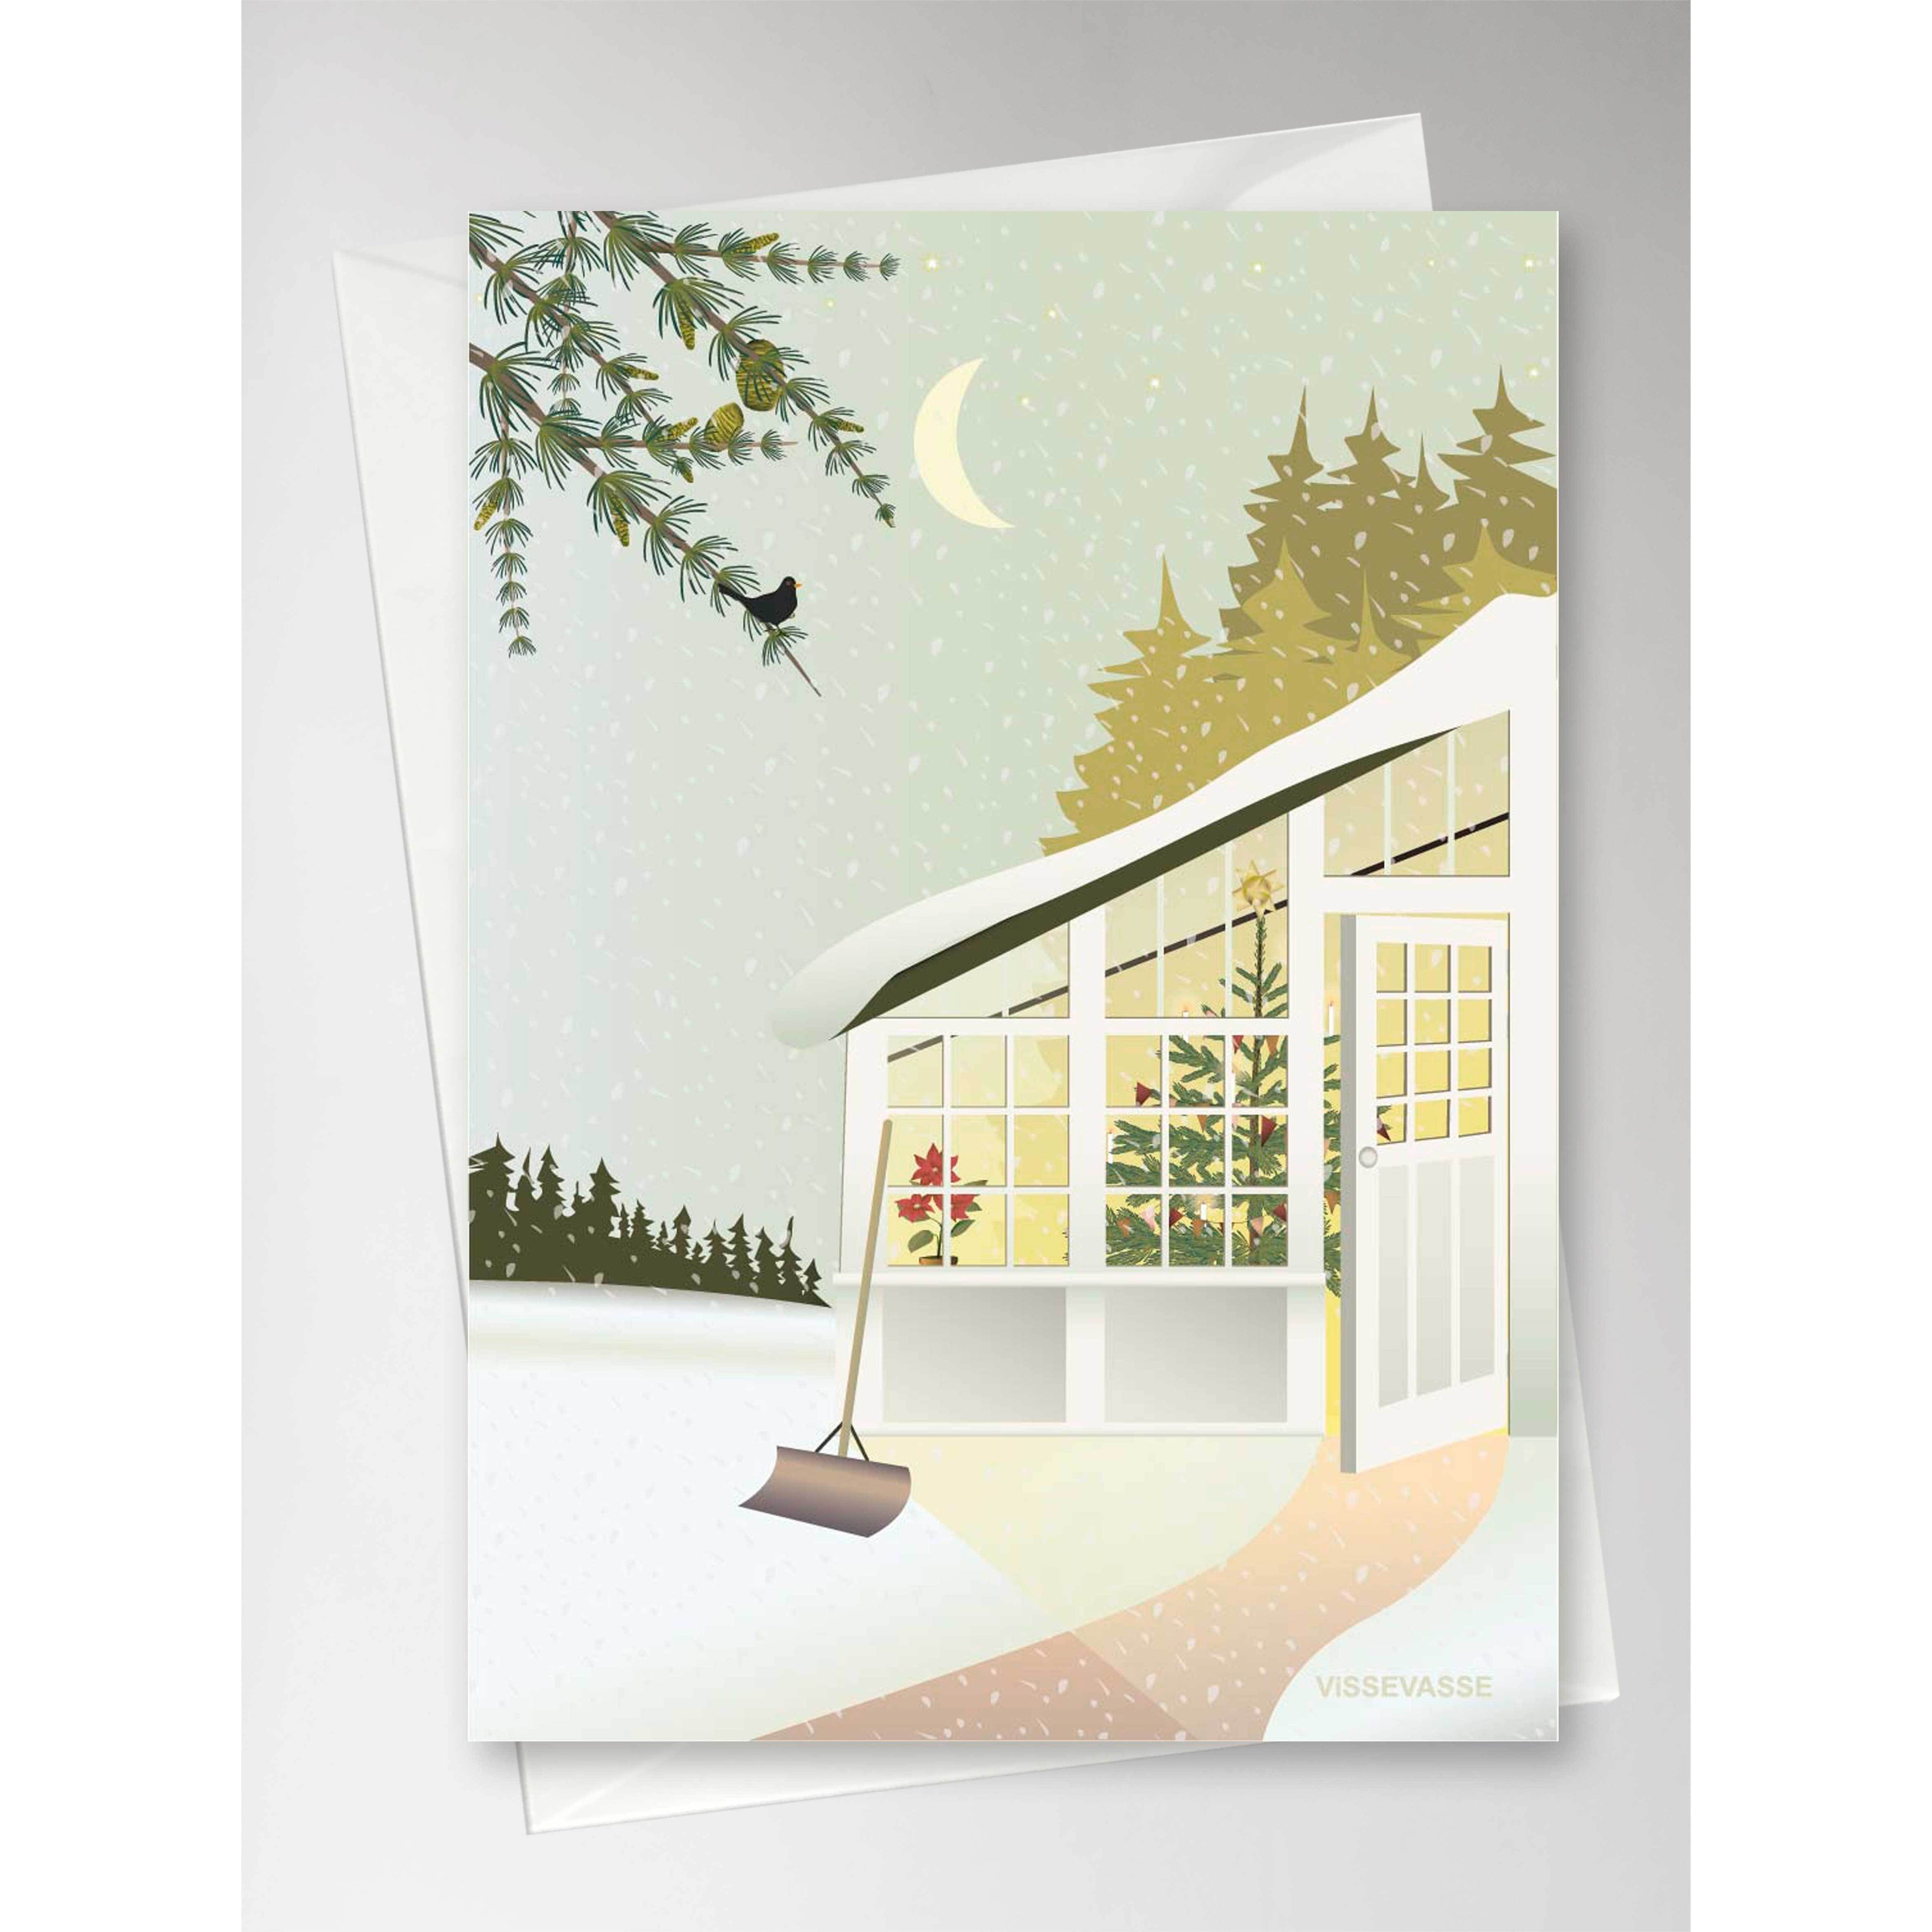 Vissevasse Christmas In The Greenhouse Greeting Card, 10,5x15cm